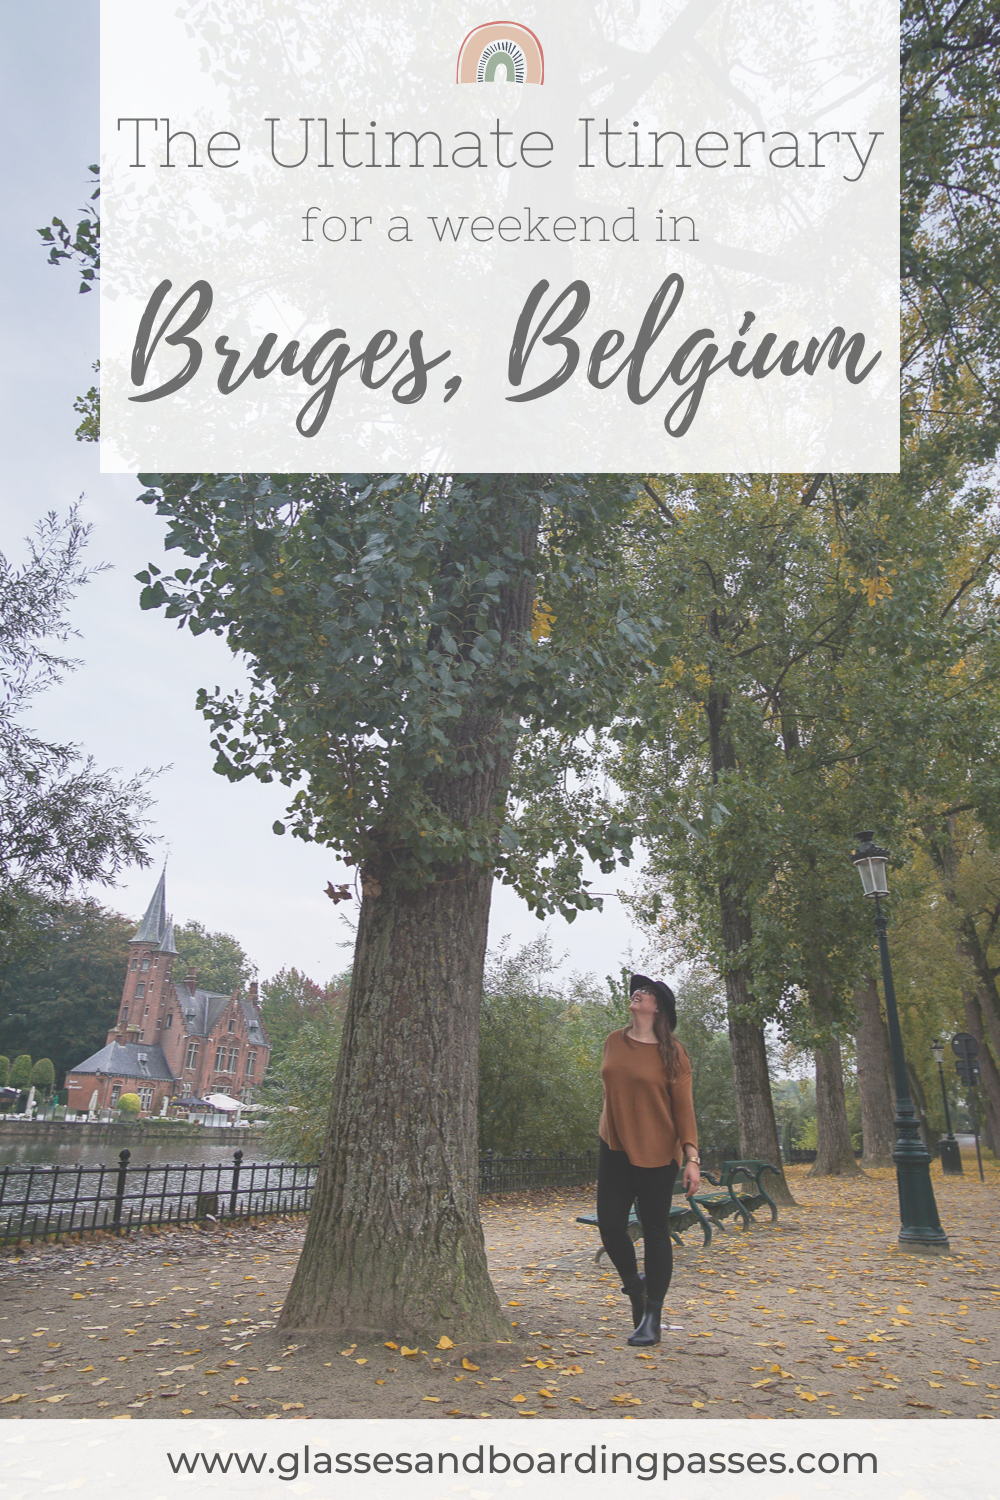 The Ultimate Itinerary for a Weekend in Bruges